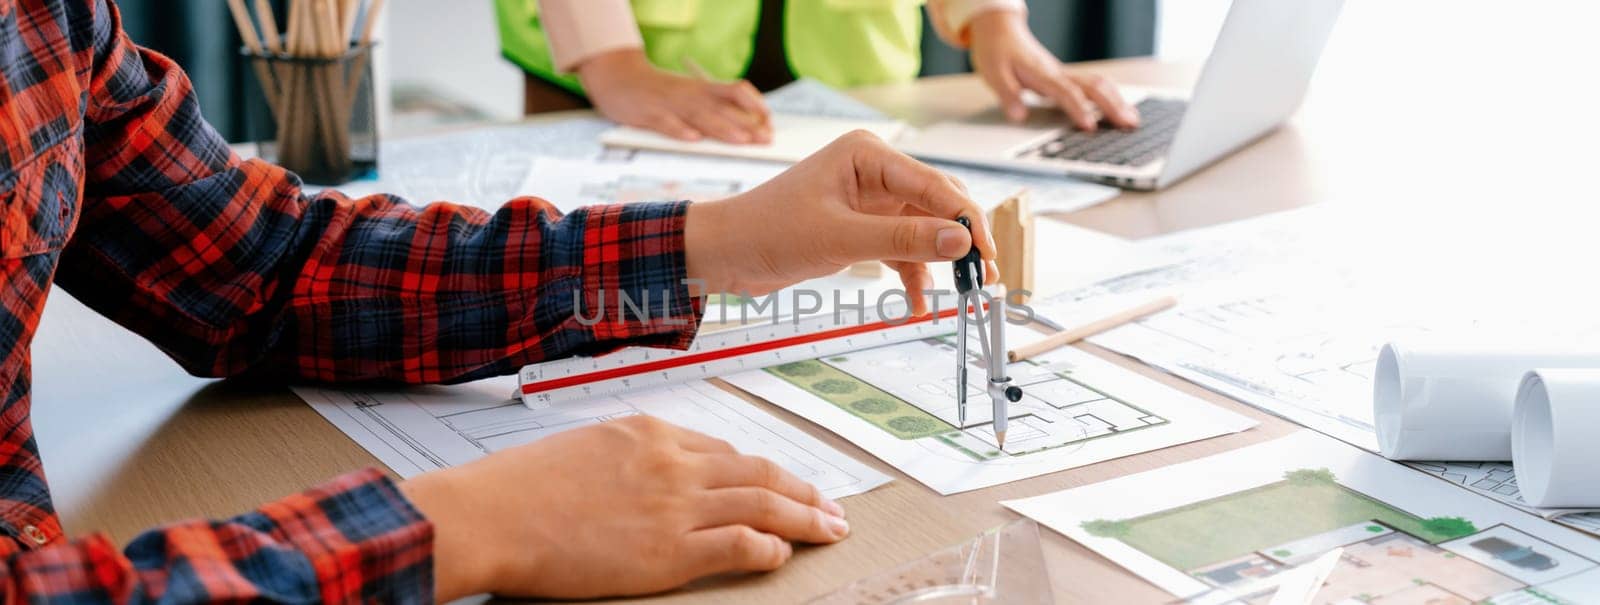 Cropped image of professional engineer team working on blueprint while his coworker working on laptop at meeting table with blueprint and wooden block scattered around. Closeup. Delineation.